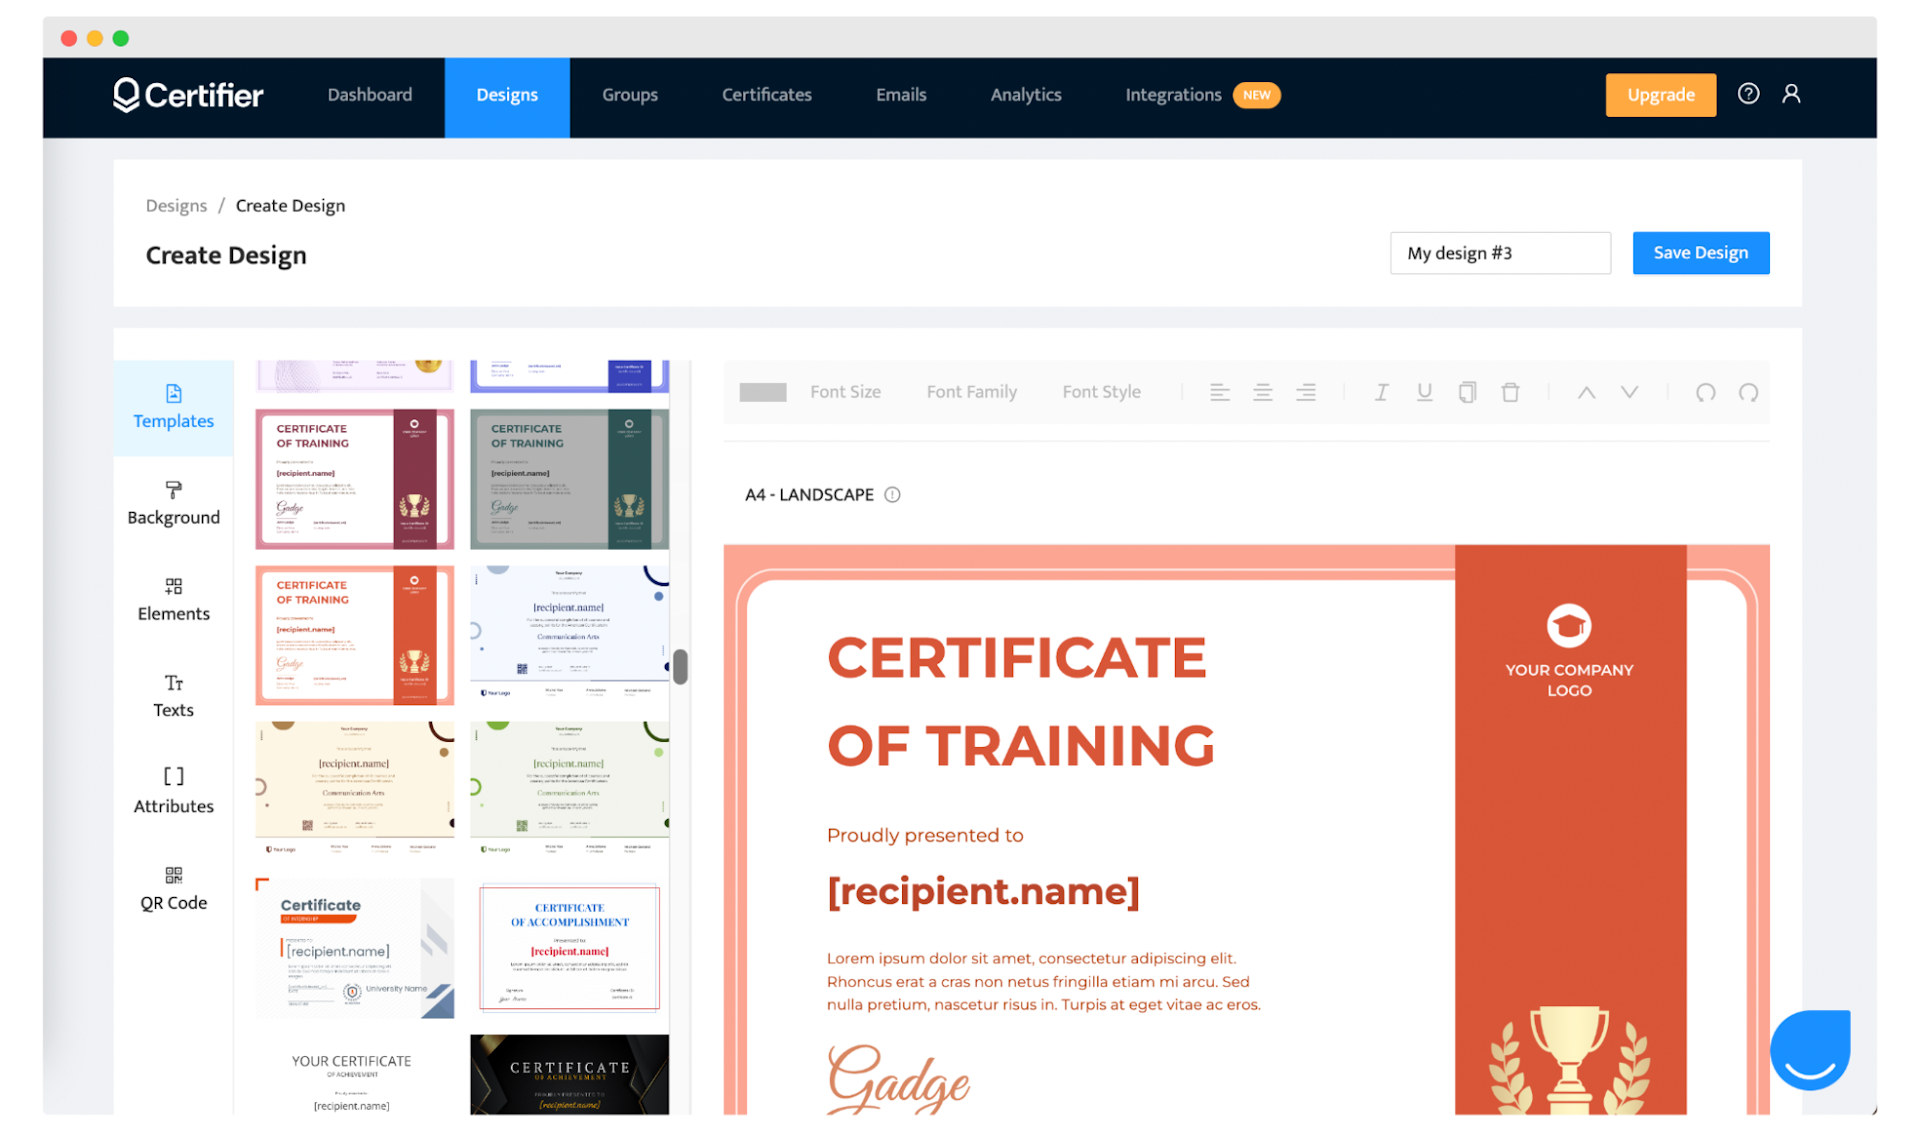 Certifier as a tool for gamification.